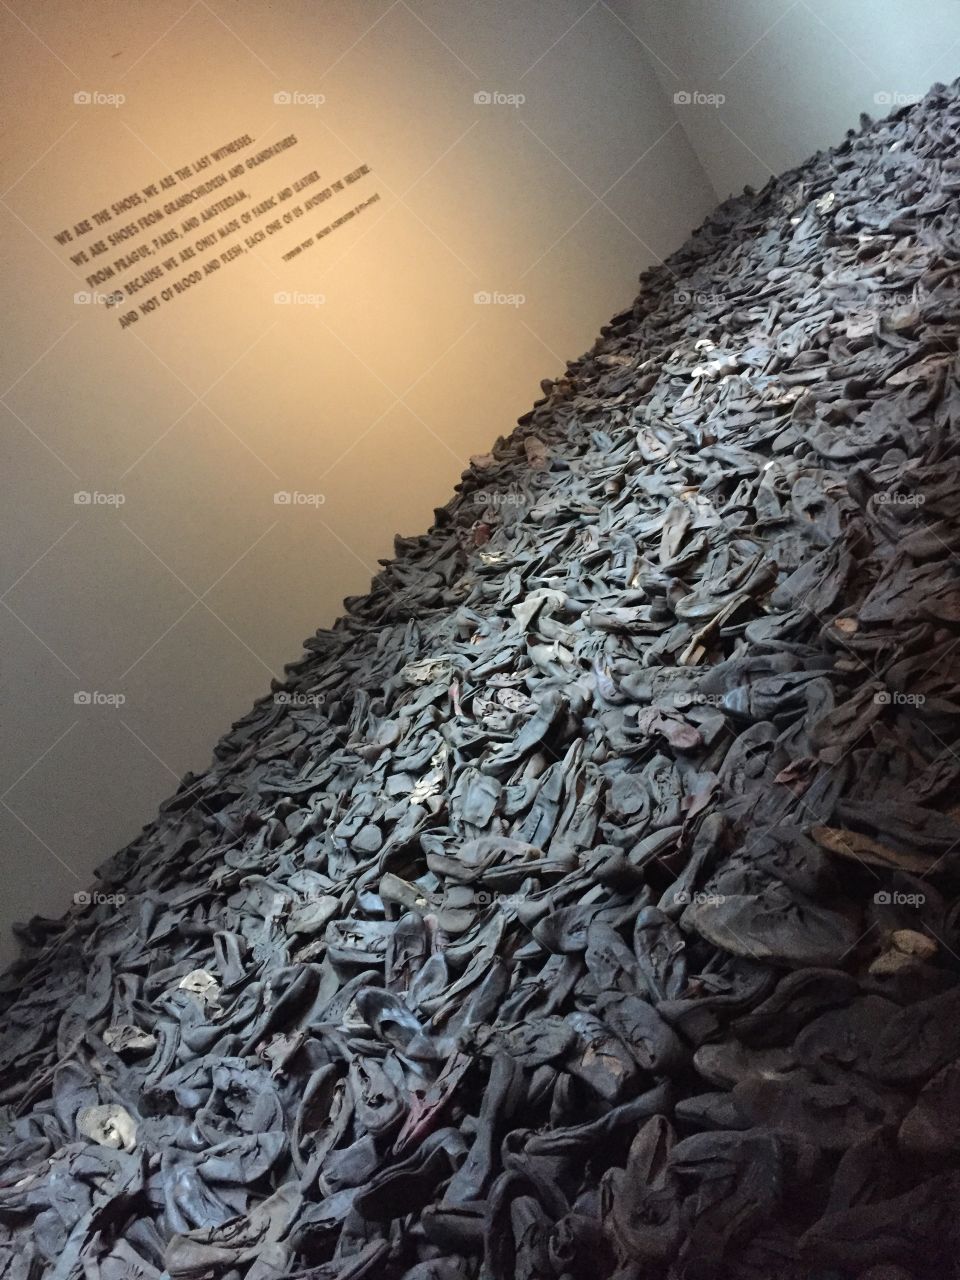 Shoes of the holocaust